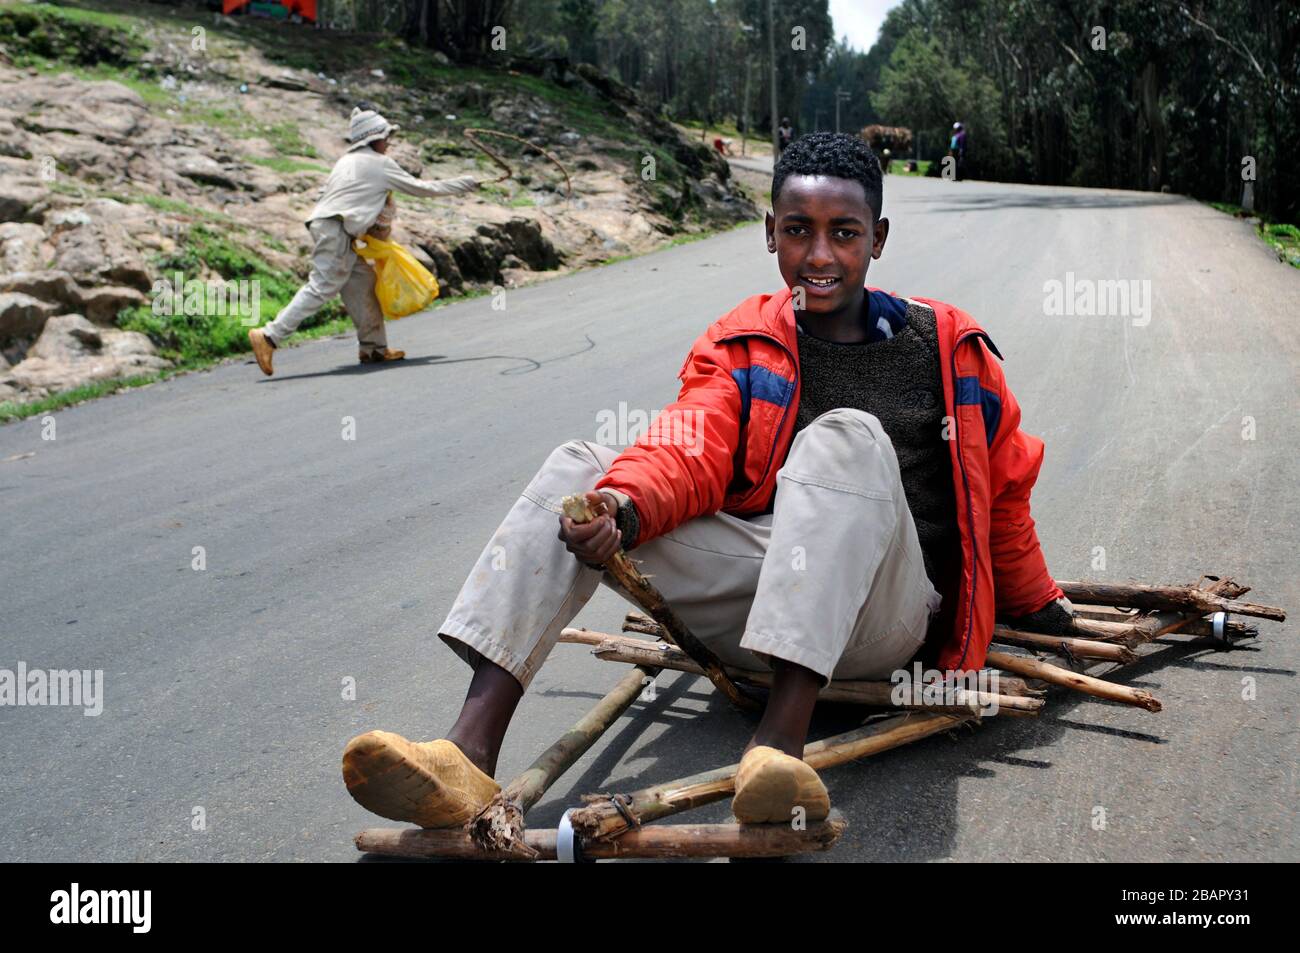 Mount Entoto Eucalyptus Forest above Addis Ababa, Ethiopia. The sacred forests of nothern Ethiopia.  Rudimentary wheelbarrows for transport Stock Photo